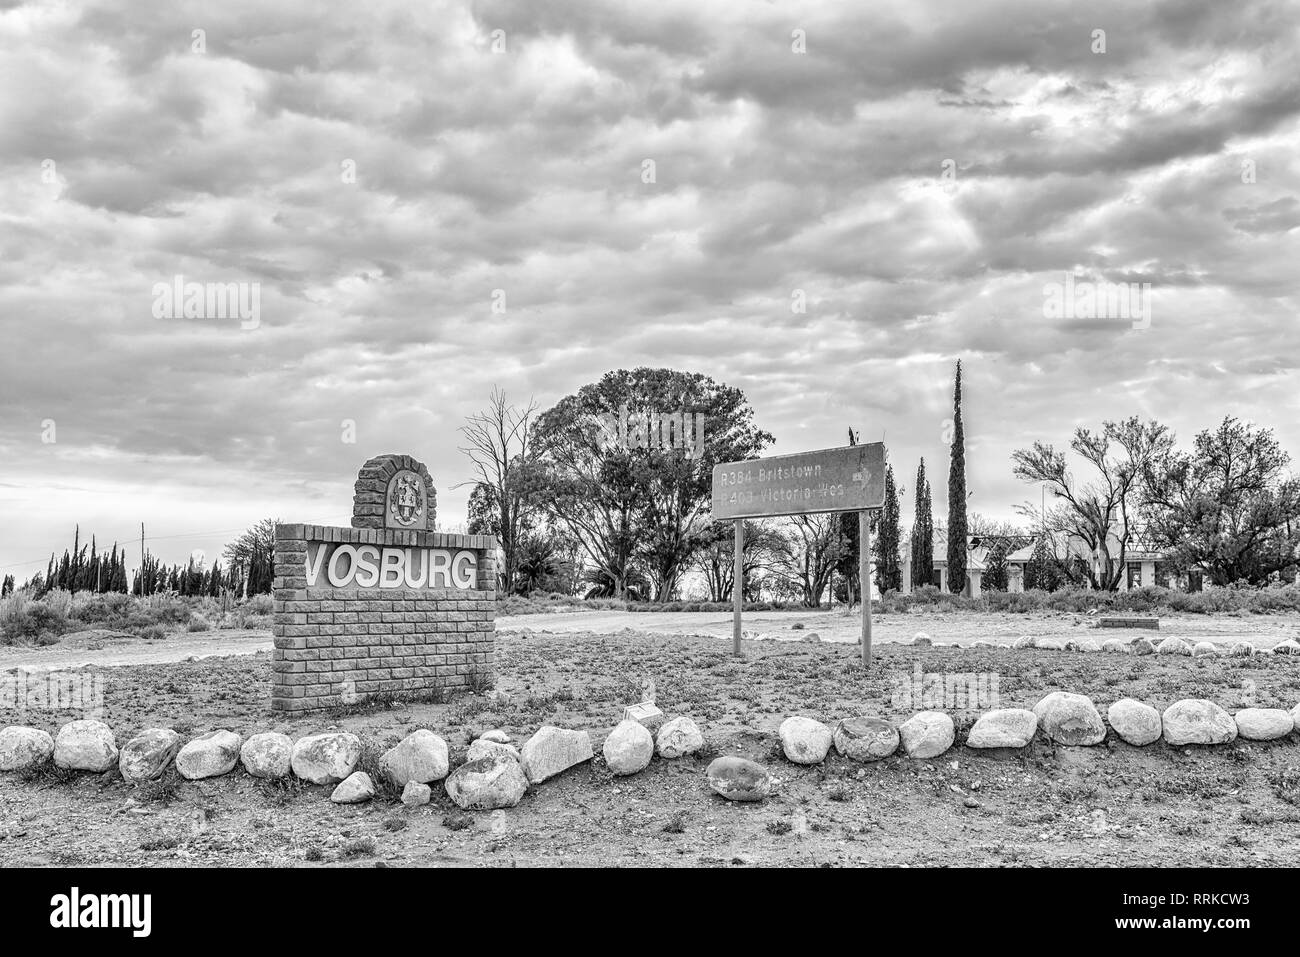 VOSBURG, SOUTH AFRICA, SEPTEMBER 1, 2018: A name board and directional sign at the entrance to Vosburg in the Northern Cape Province. Monochrome Stock Photo